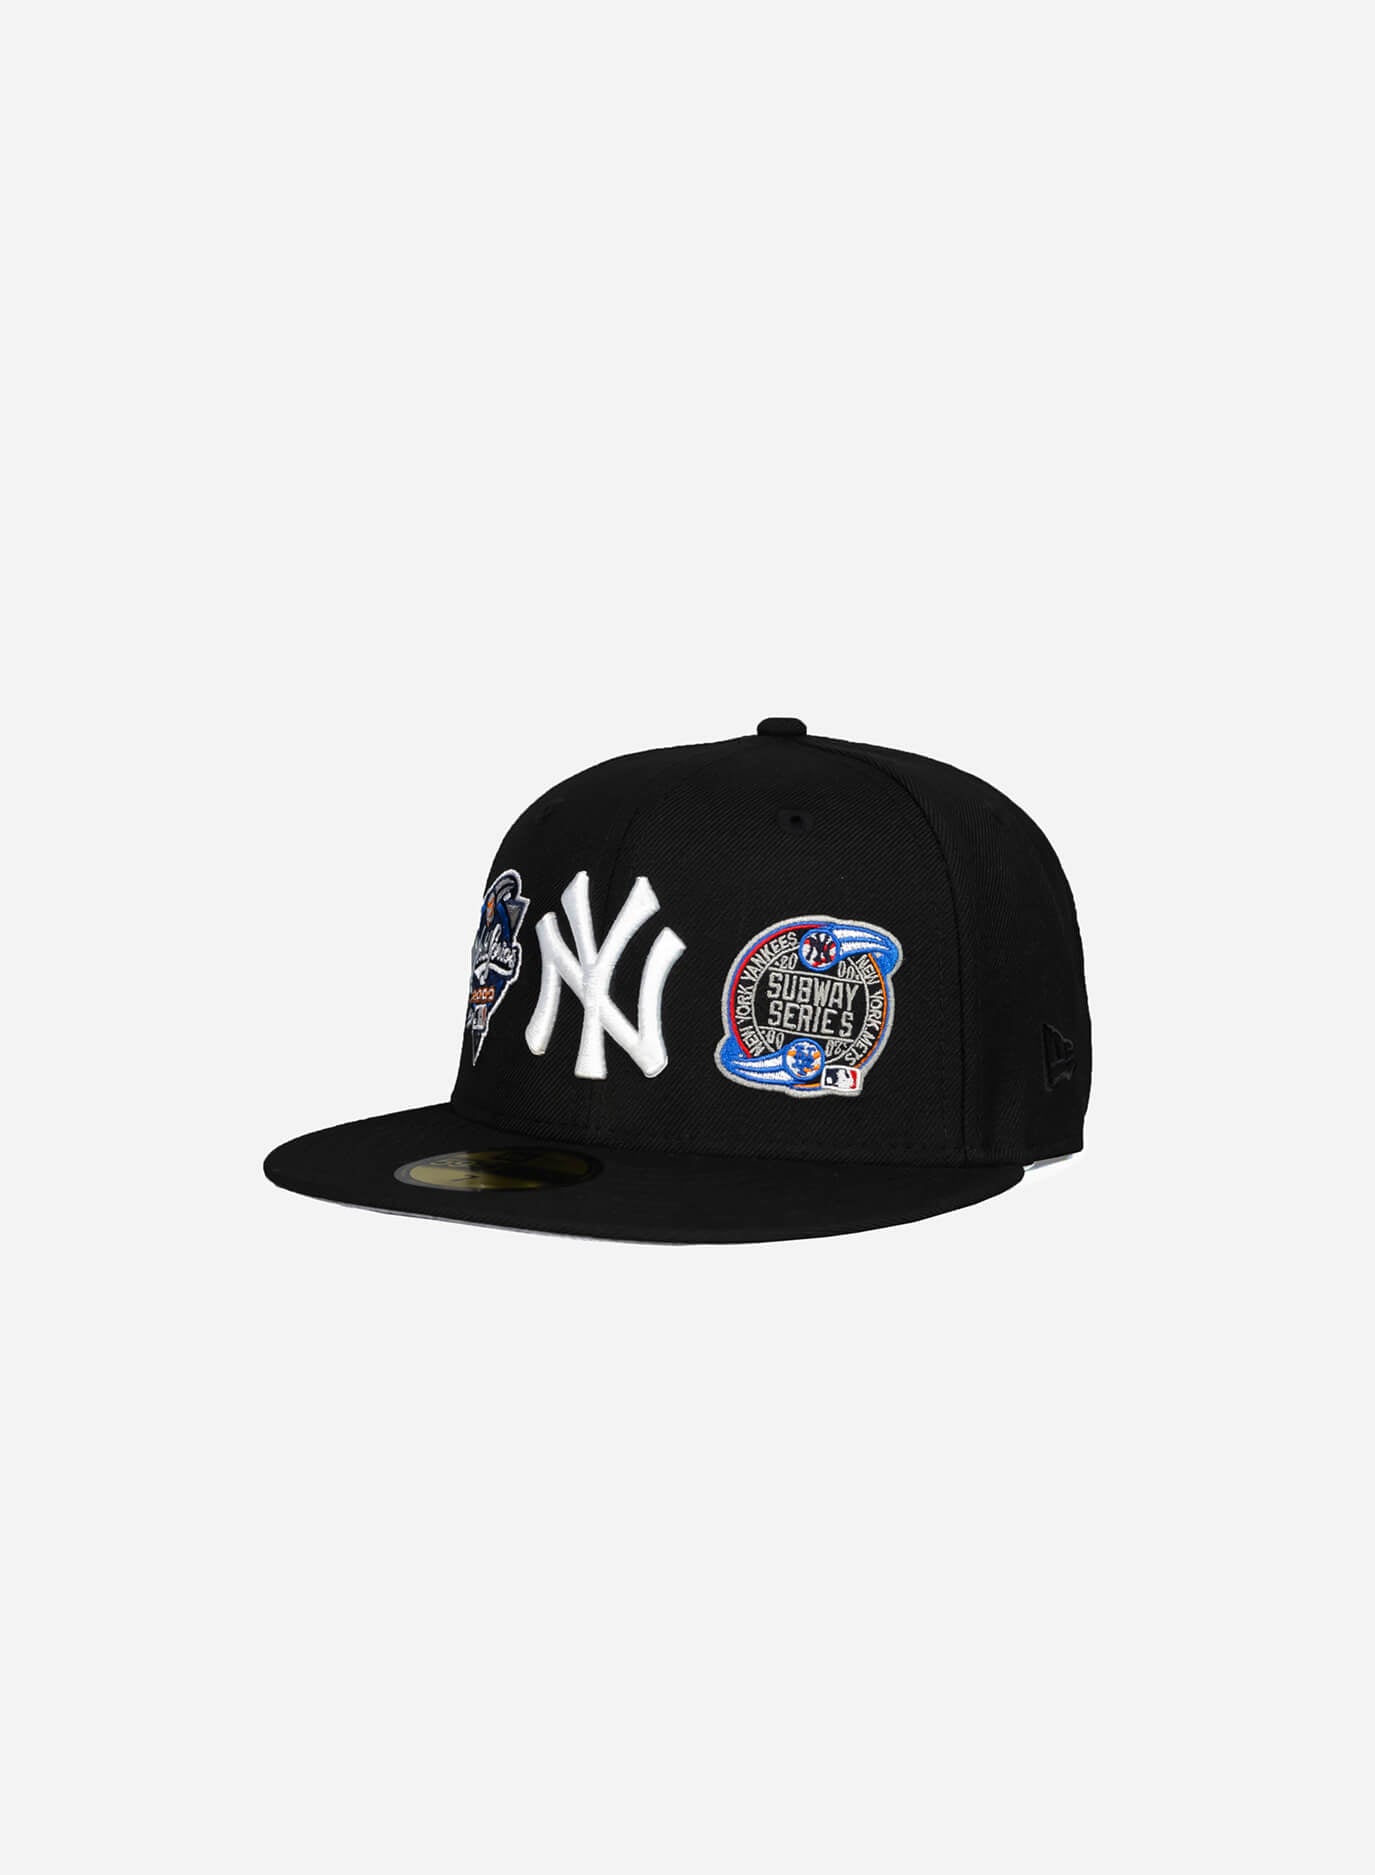 New York Yankees Subway Series 59Fifty Fitted